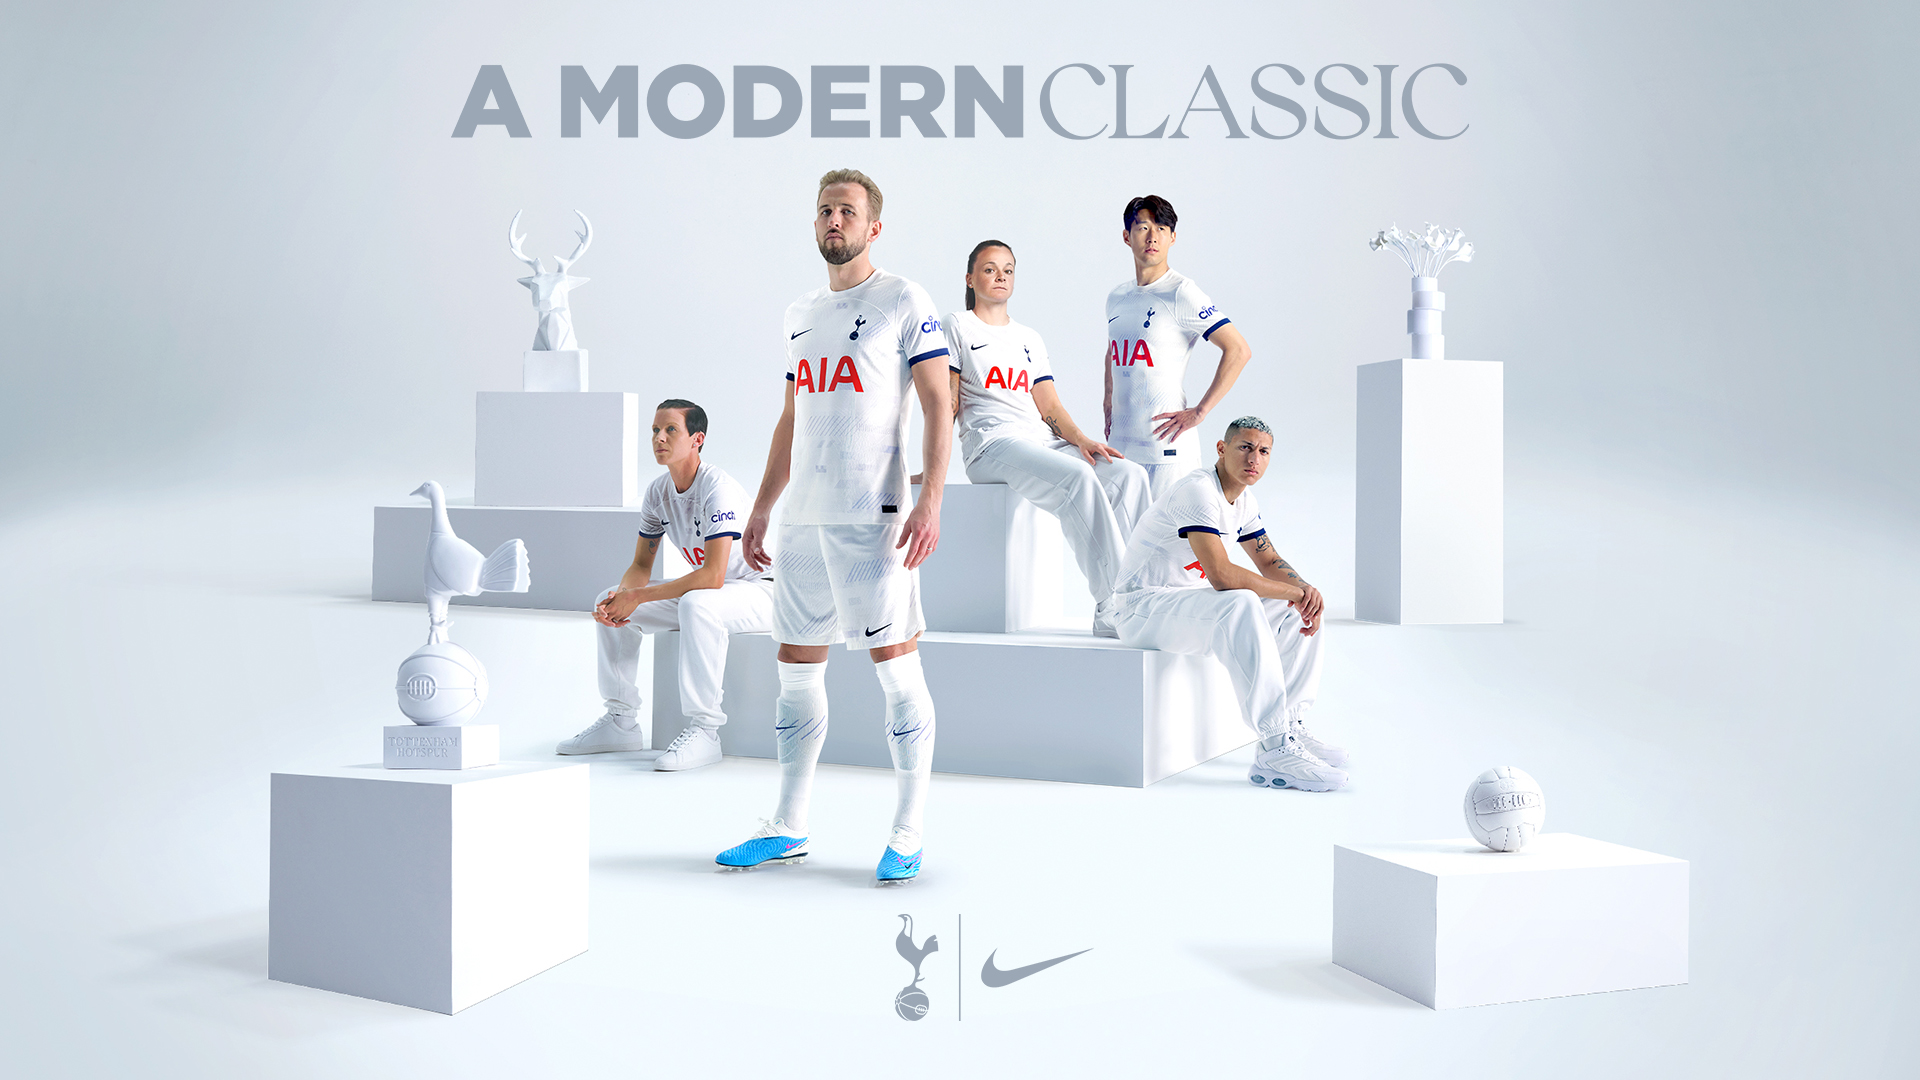 Tottenham Hotspurs players standing in a white gallery backdrop with various white props